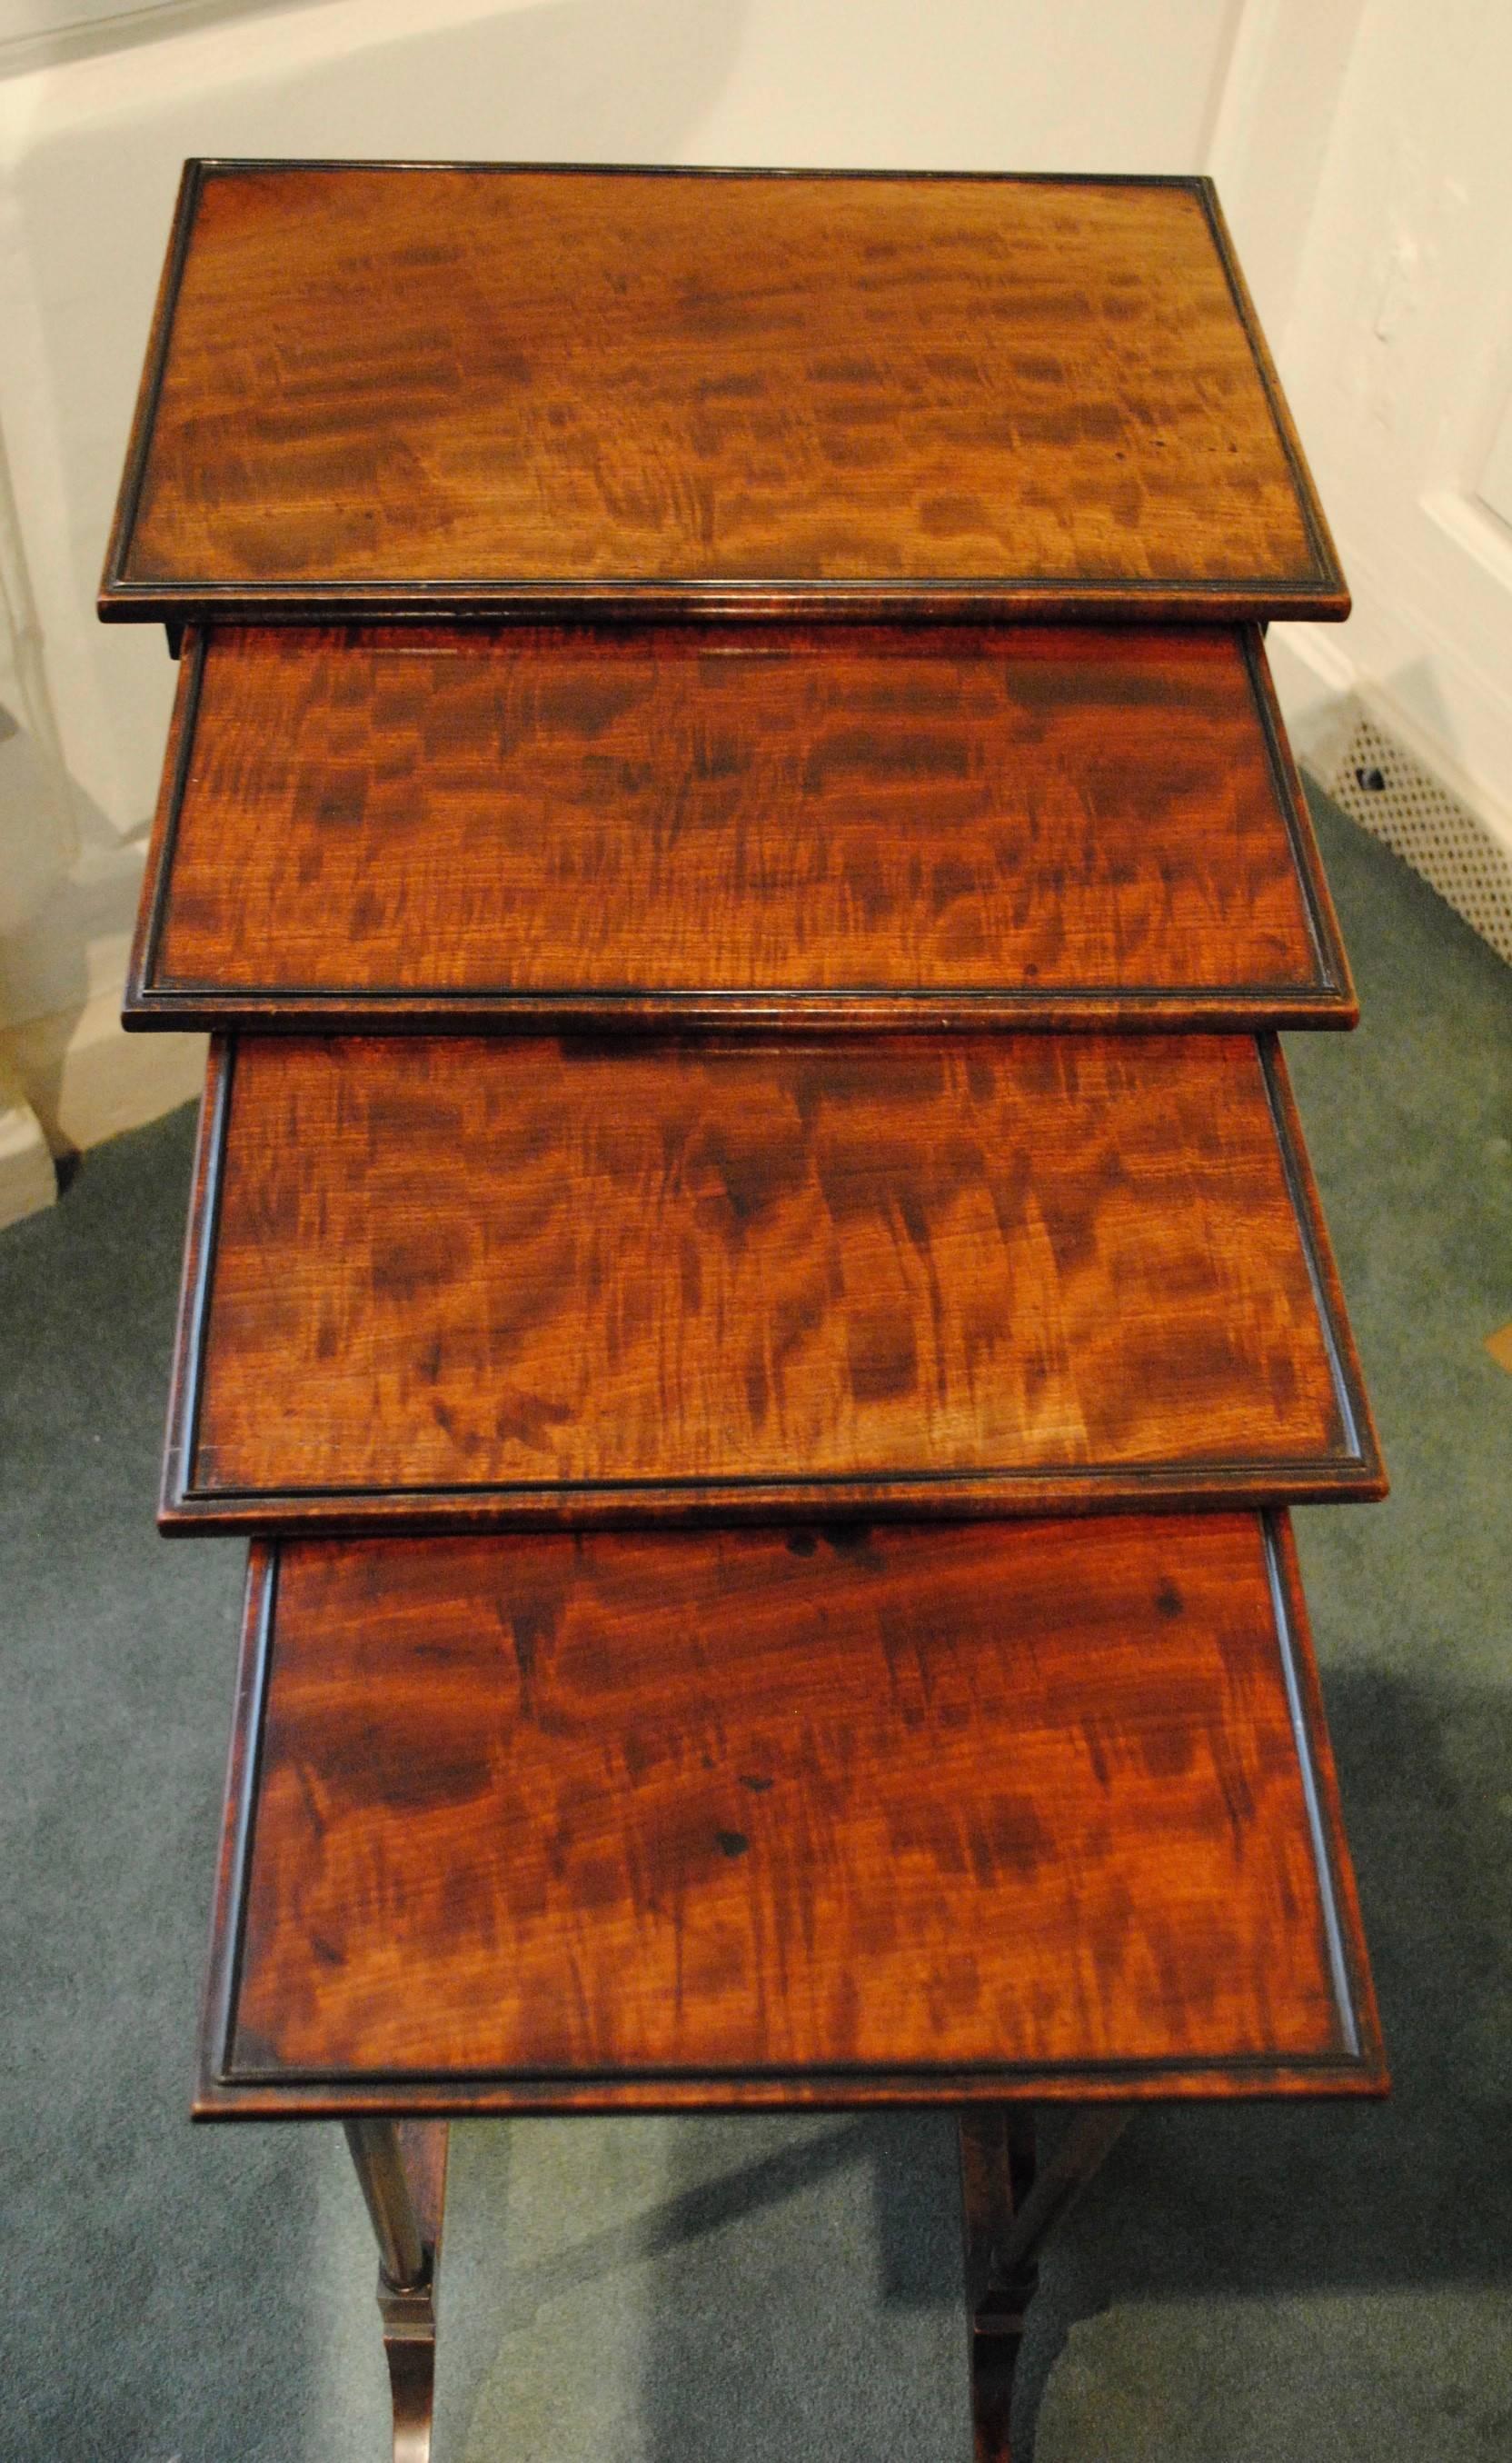 A fine quality nest of four late 18th century tables in superb original condition the tops with well grained fiddle back mahogany and ebony beading.